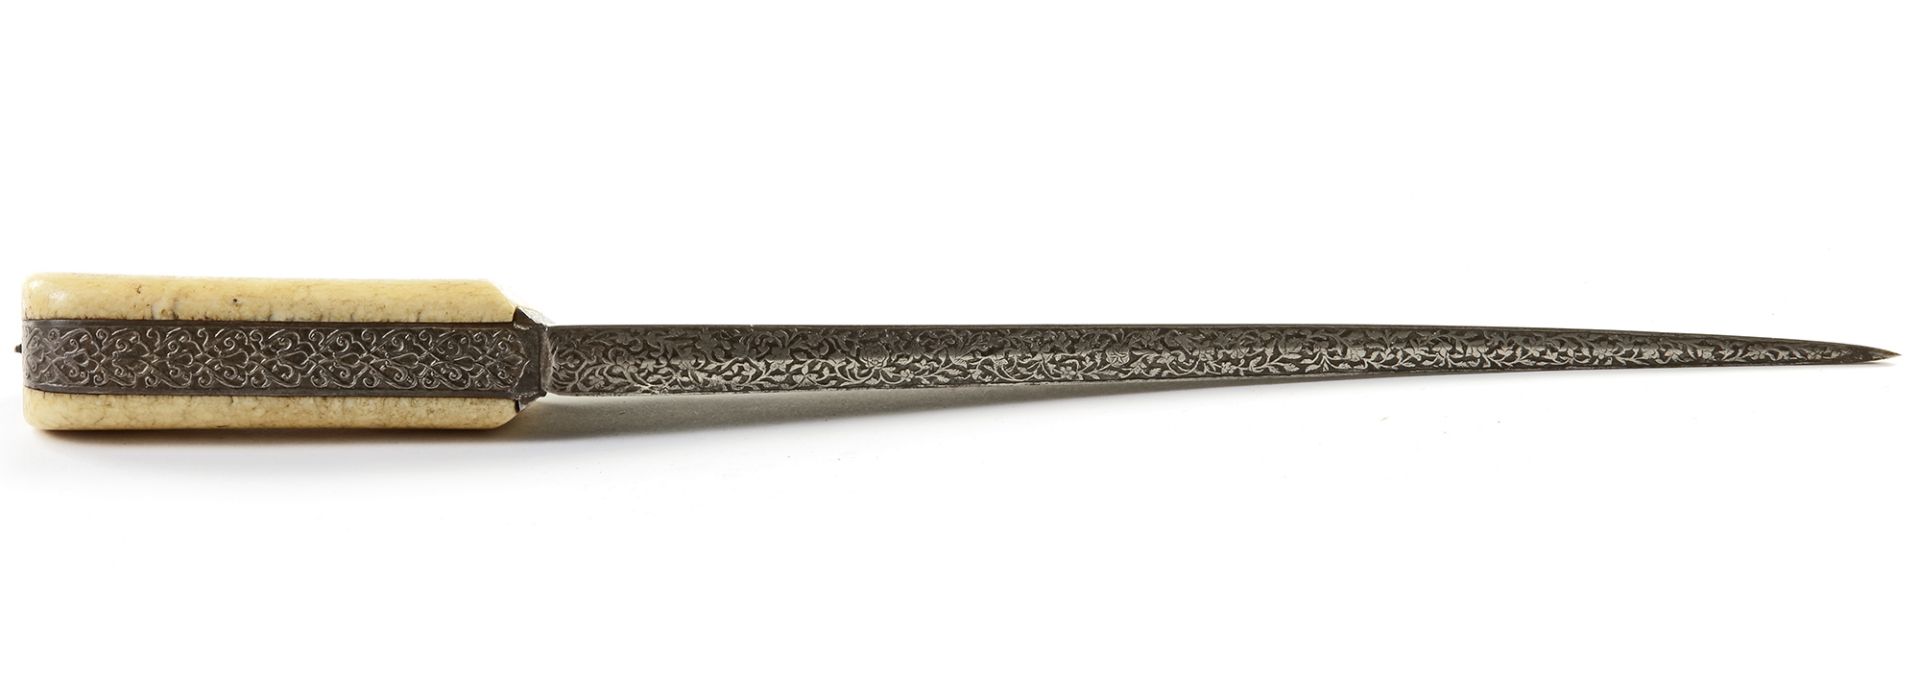 AN IVORY-HILTED WATERED-STEEL PESH-KABZ, INDIA, LATE 18TH-EARLY 19TH CENTURY - Bild 12 aus 12